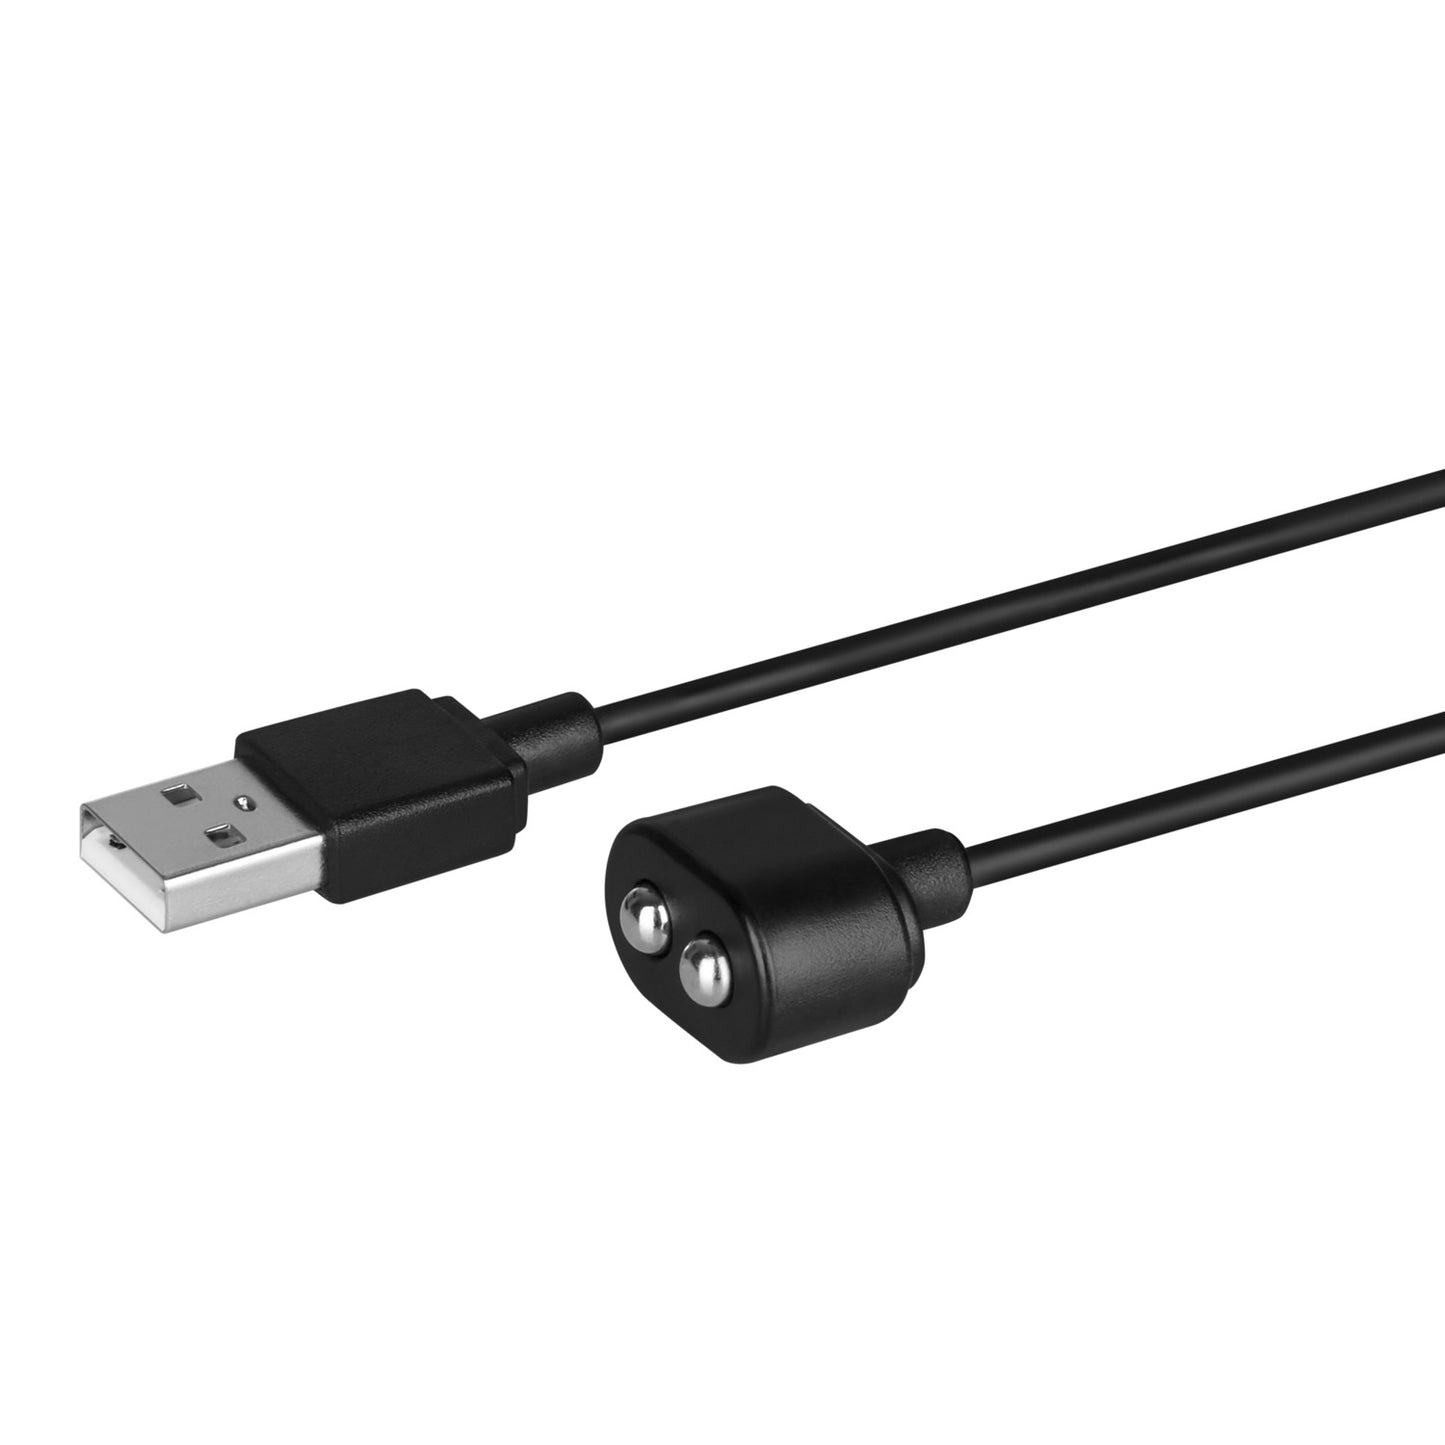 USB Charging Cable - Black